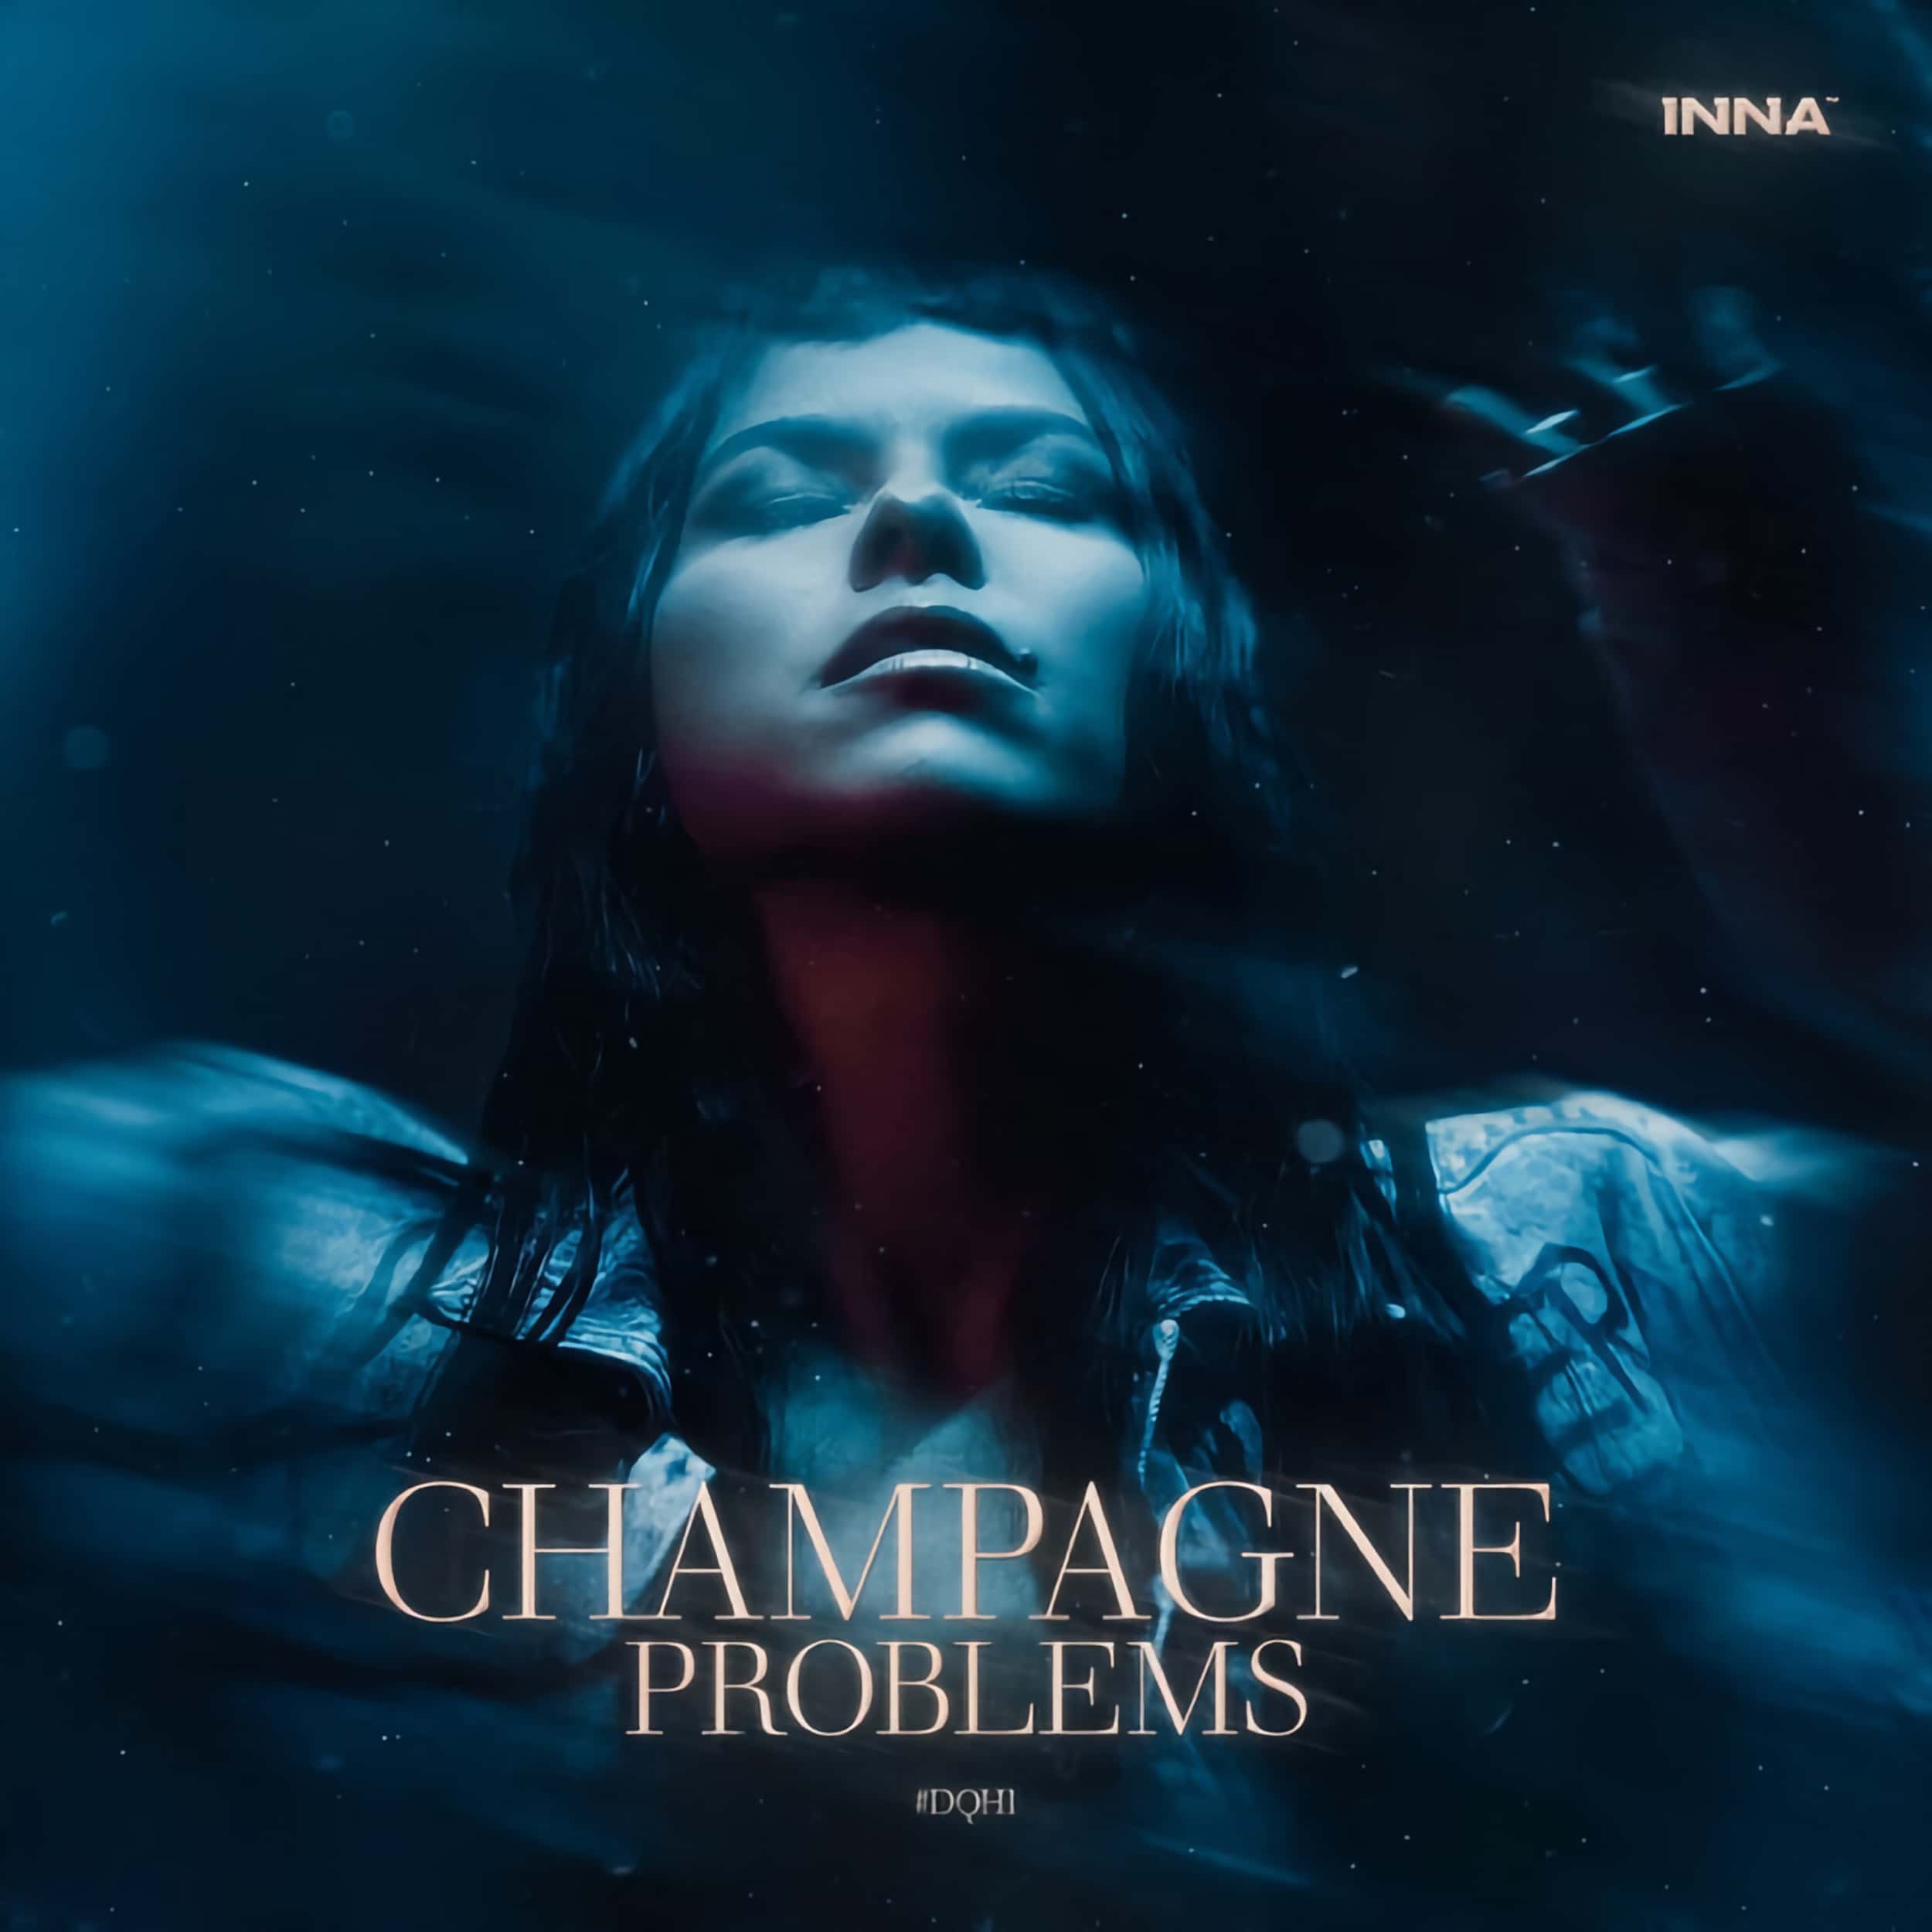 Inna – Champagne Problems #DQH1